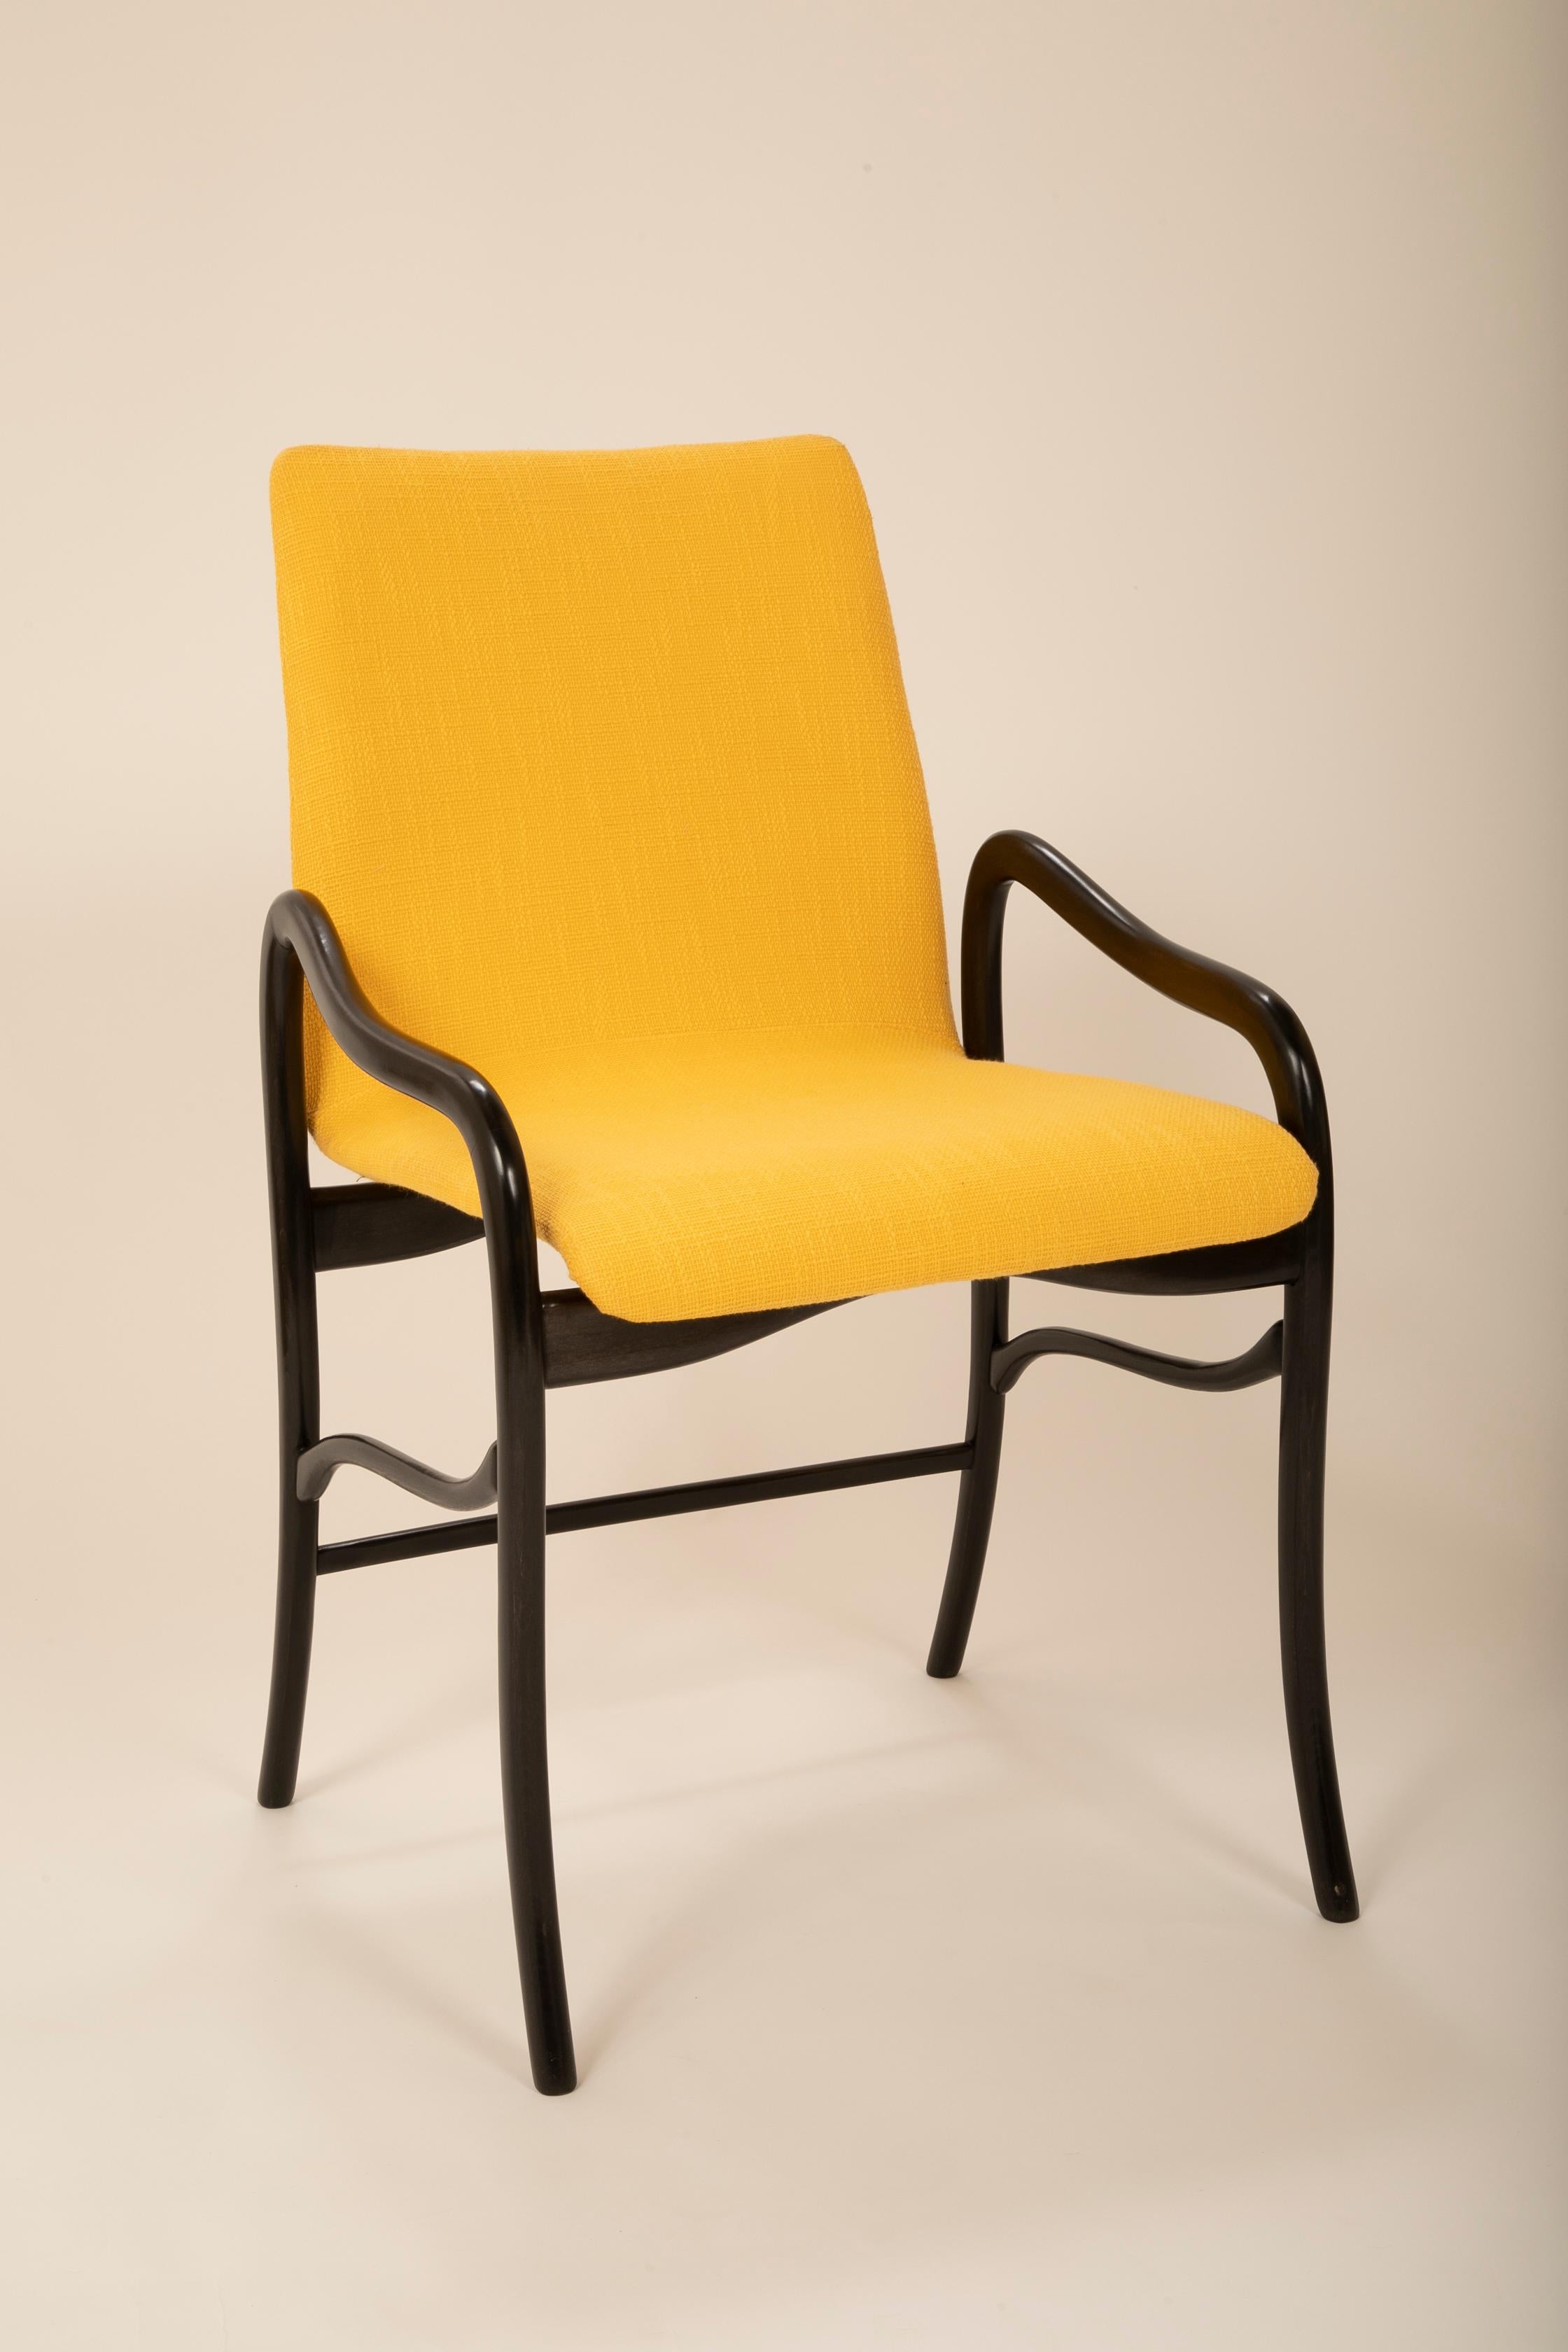 Modern Set of 8 Sculptural Italian Dining Chairs Attributed to Malatesta & Mason For Sale